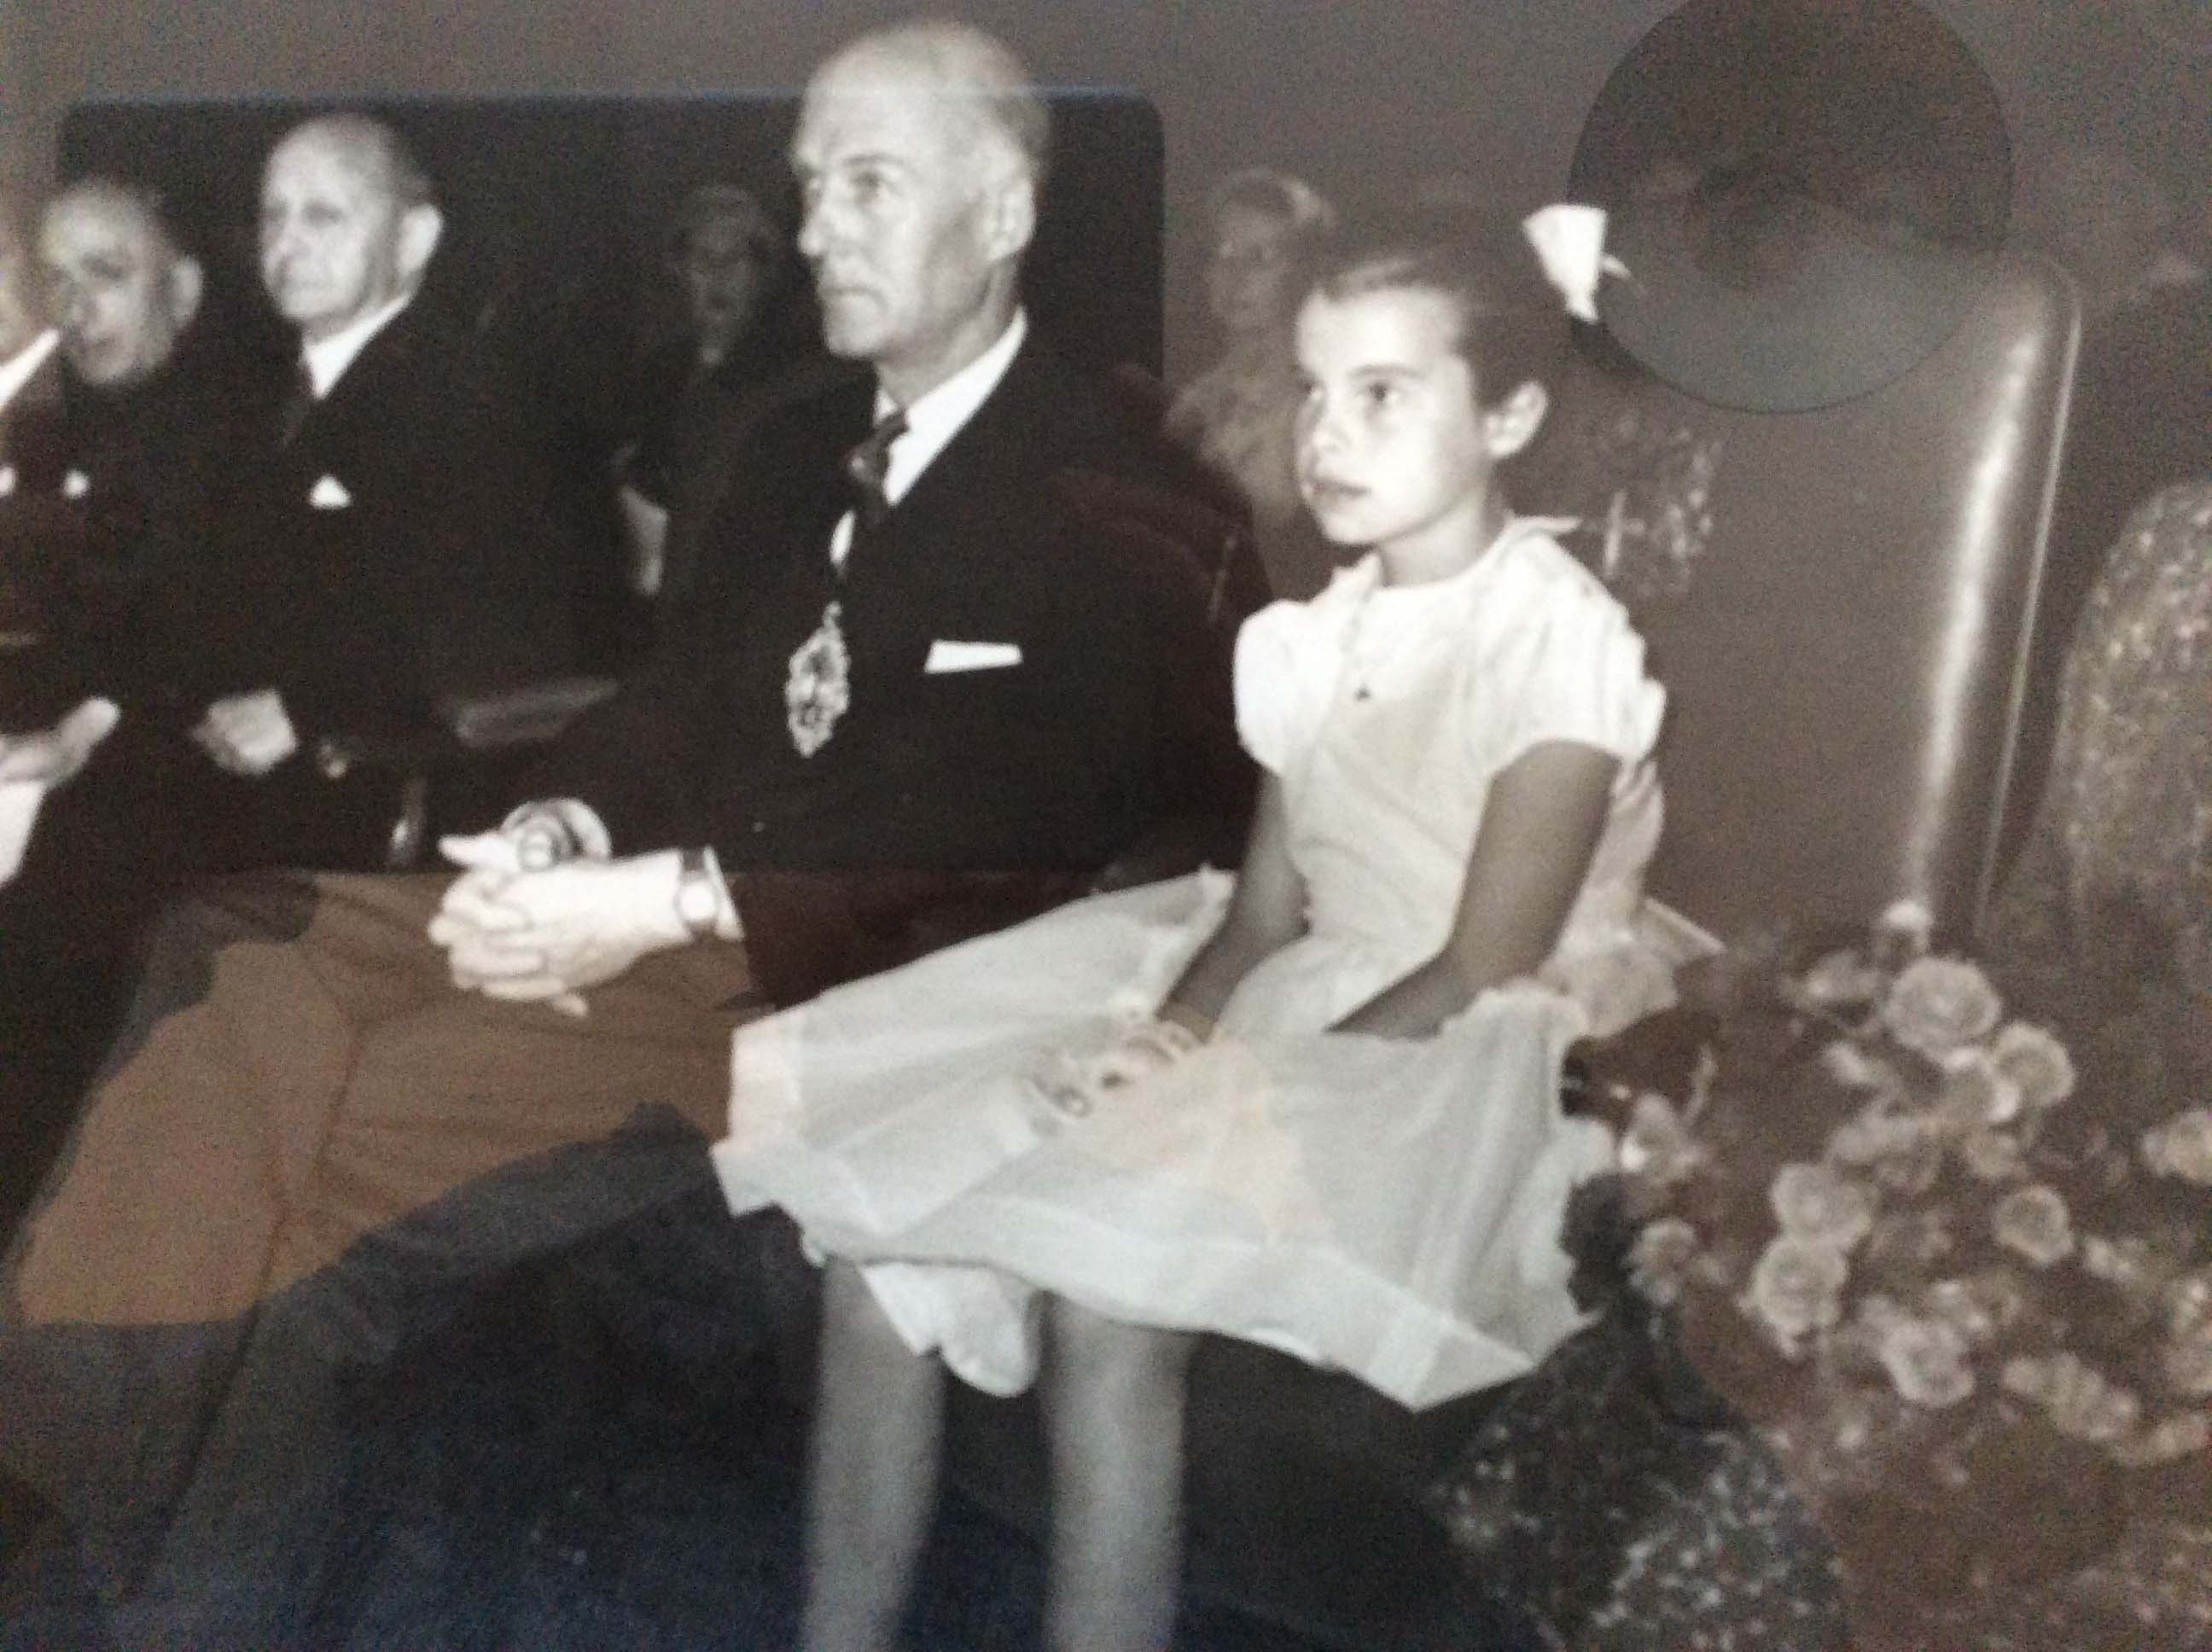 Maggie at a ceremony to thank blood donors in 1958